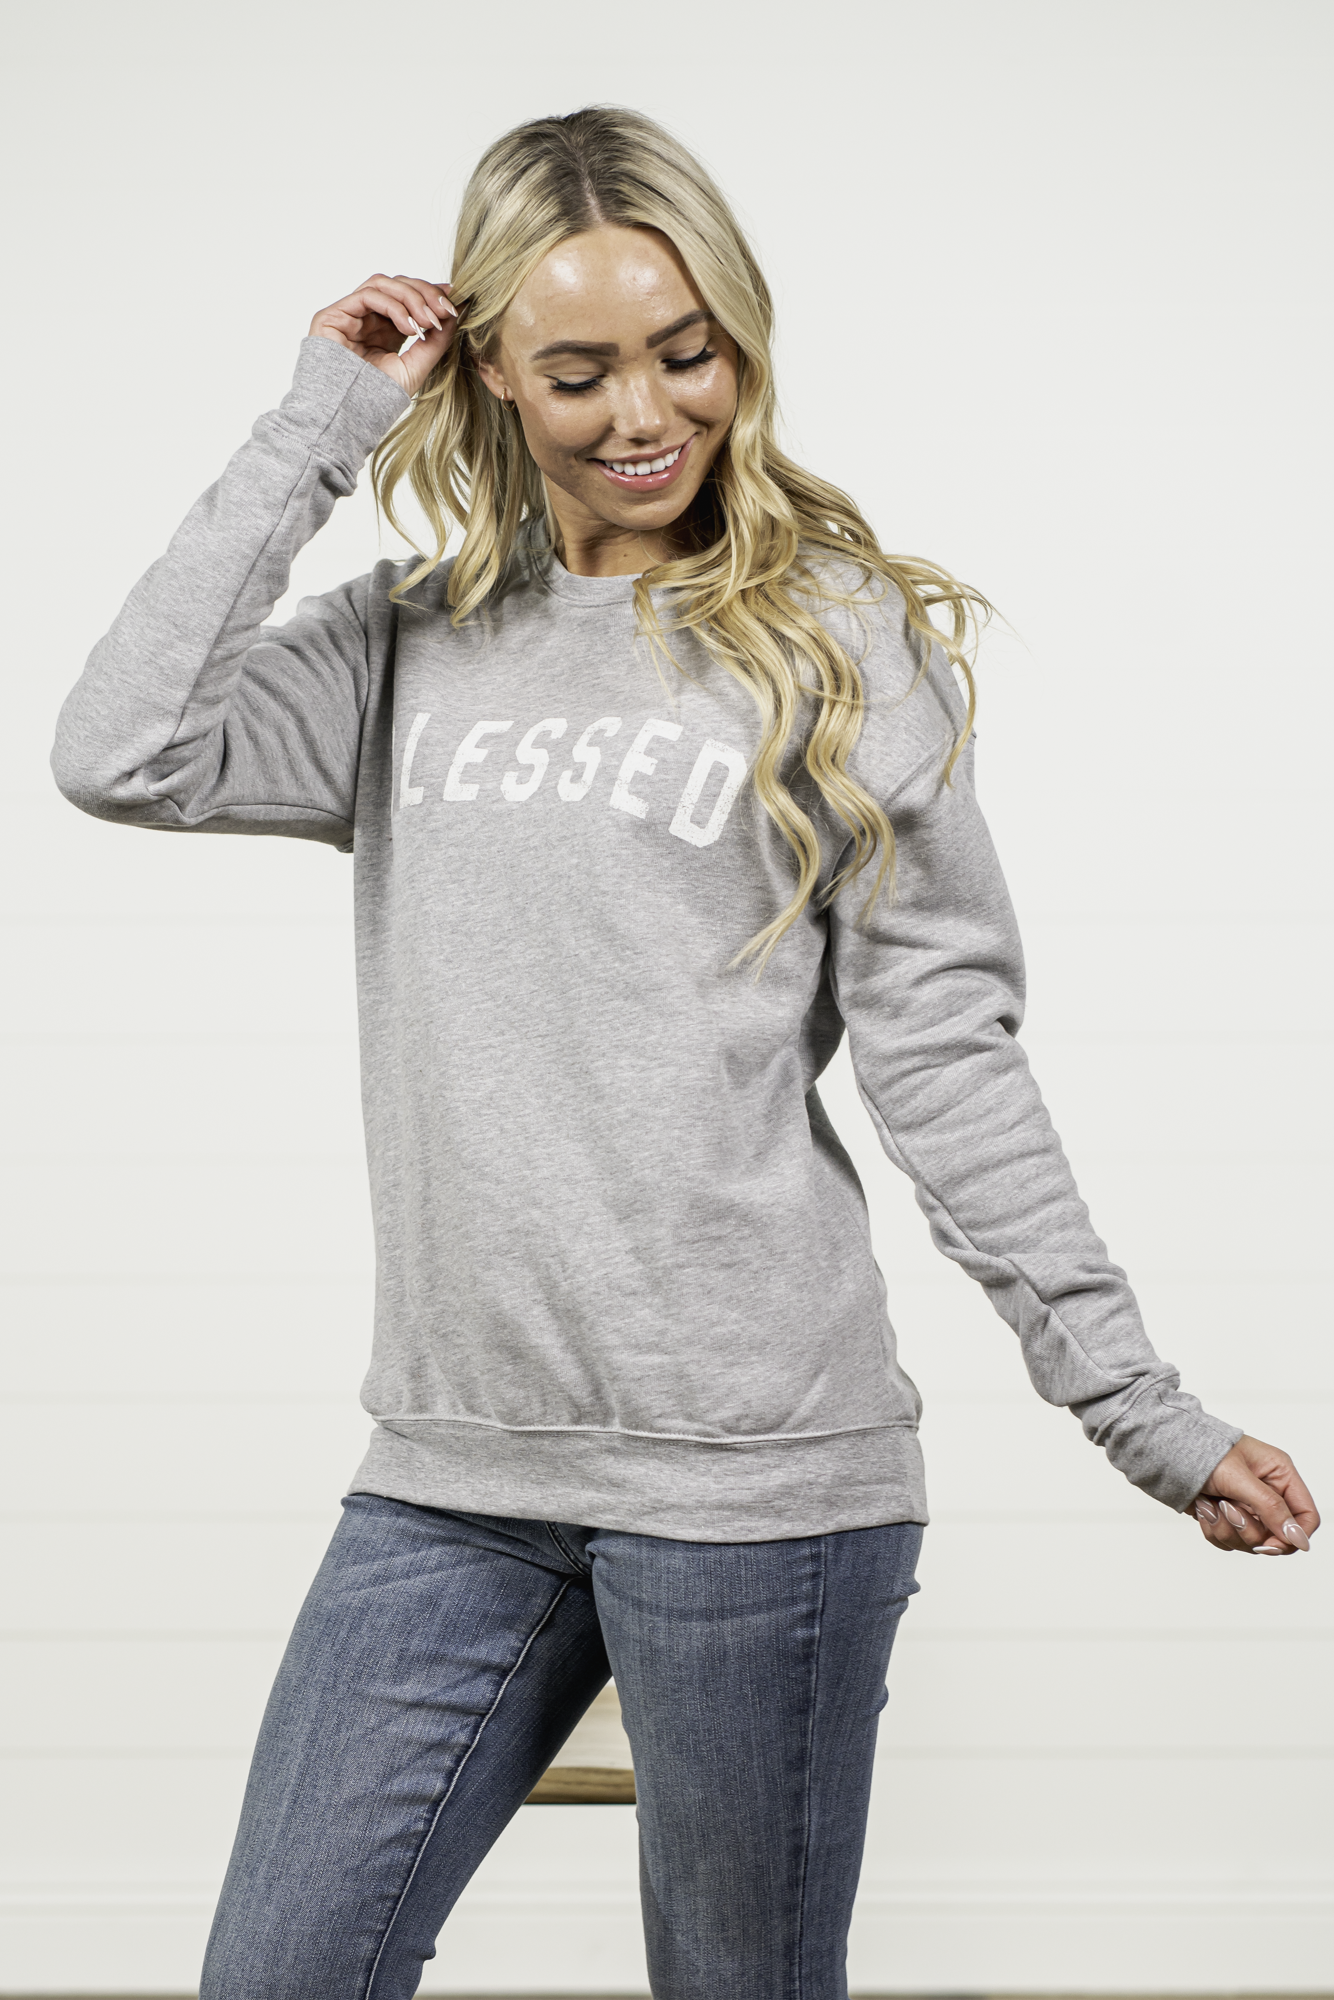 Blessed by Oat Collective   Graphic Fleece Pullover Sweater  Color: Heather Grey Neckline: Round  Sleeve: Long Sleeve Spun from plush sponge fleece fabric Ribbed Cuffed Wrist Bands Oversized Pull Over Style #: OT2112L711 Contact us for any additional measurements or sizing.  